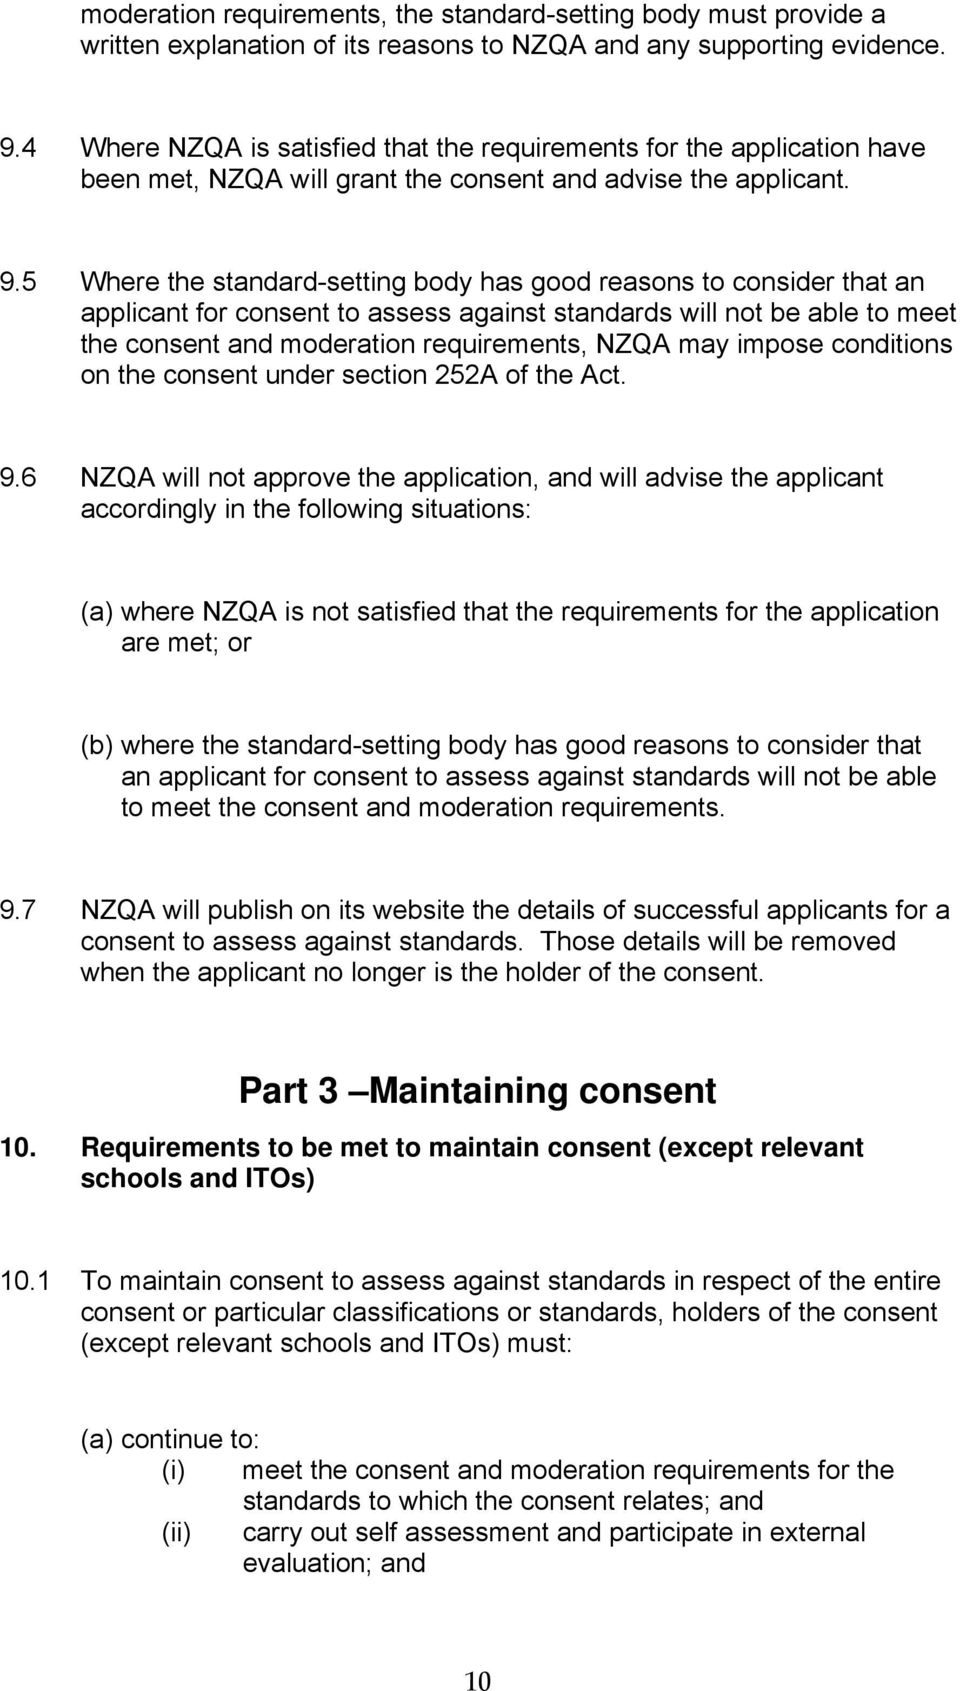 5 Where the standard-setting body has good reasons to consider that an applicant for consent to assess against standards will not be able to meet the consent and moderation requirements, NZQA may